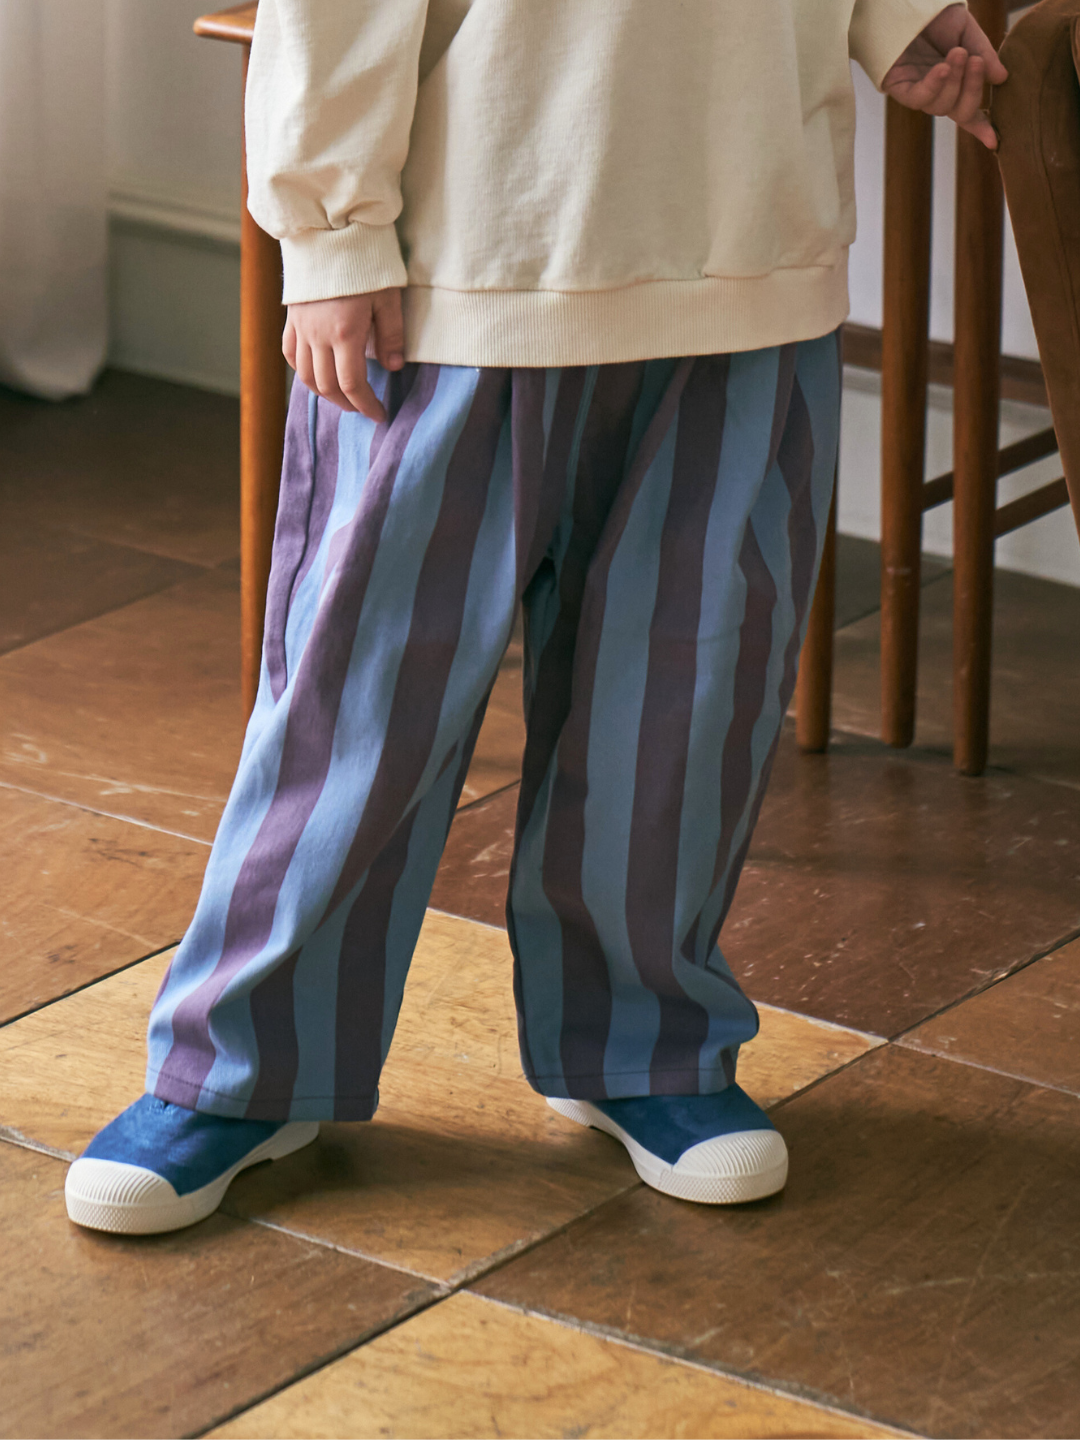 Purple | Cropped waist down image of a child wearing baggy pants in blue with wide purple vertical stripes, standing on a wood tiled floor.